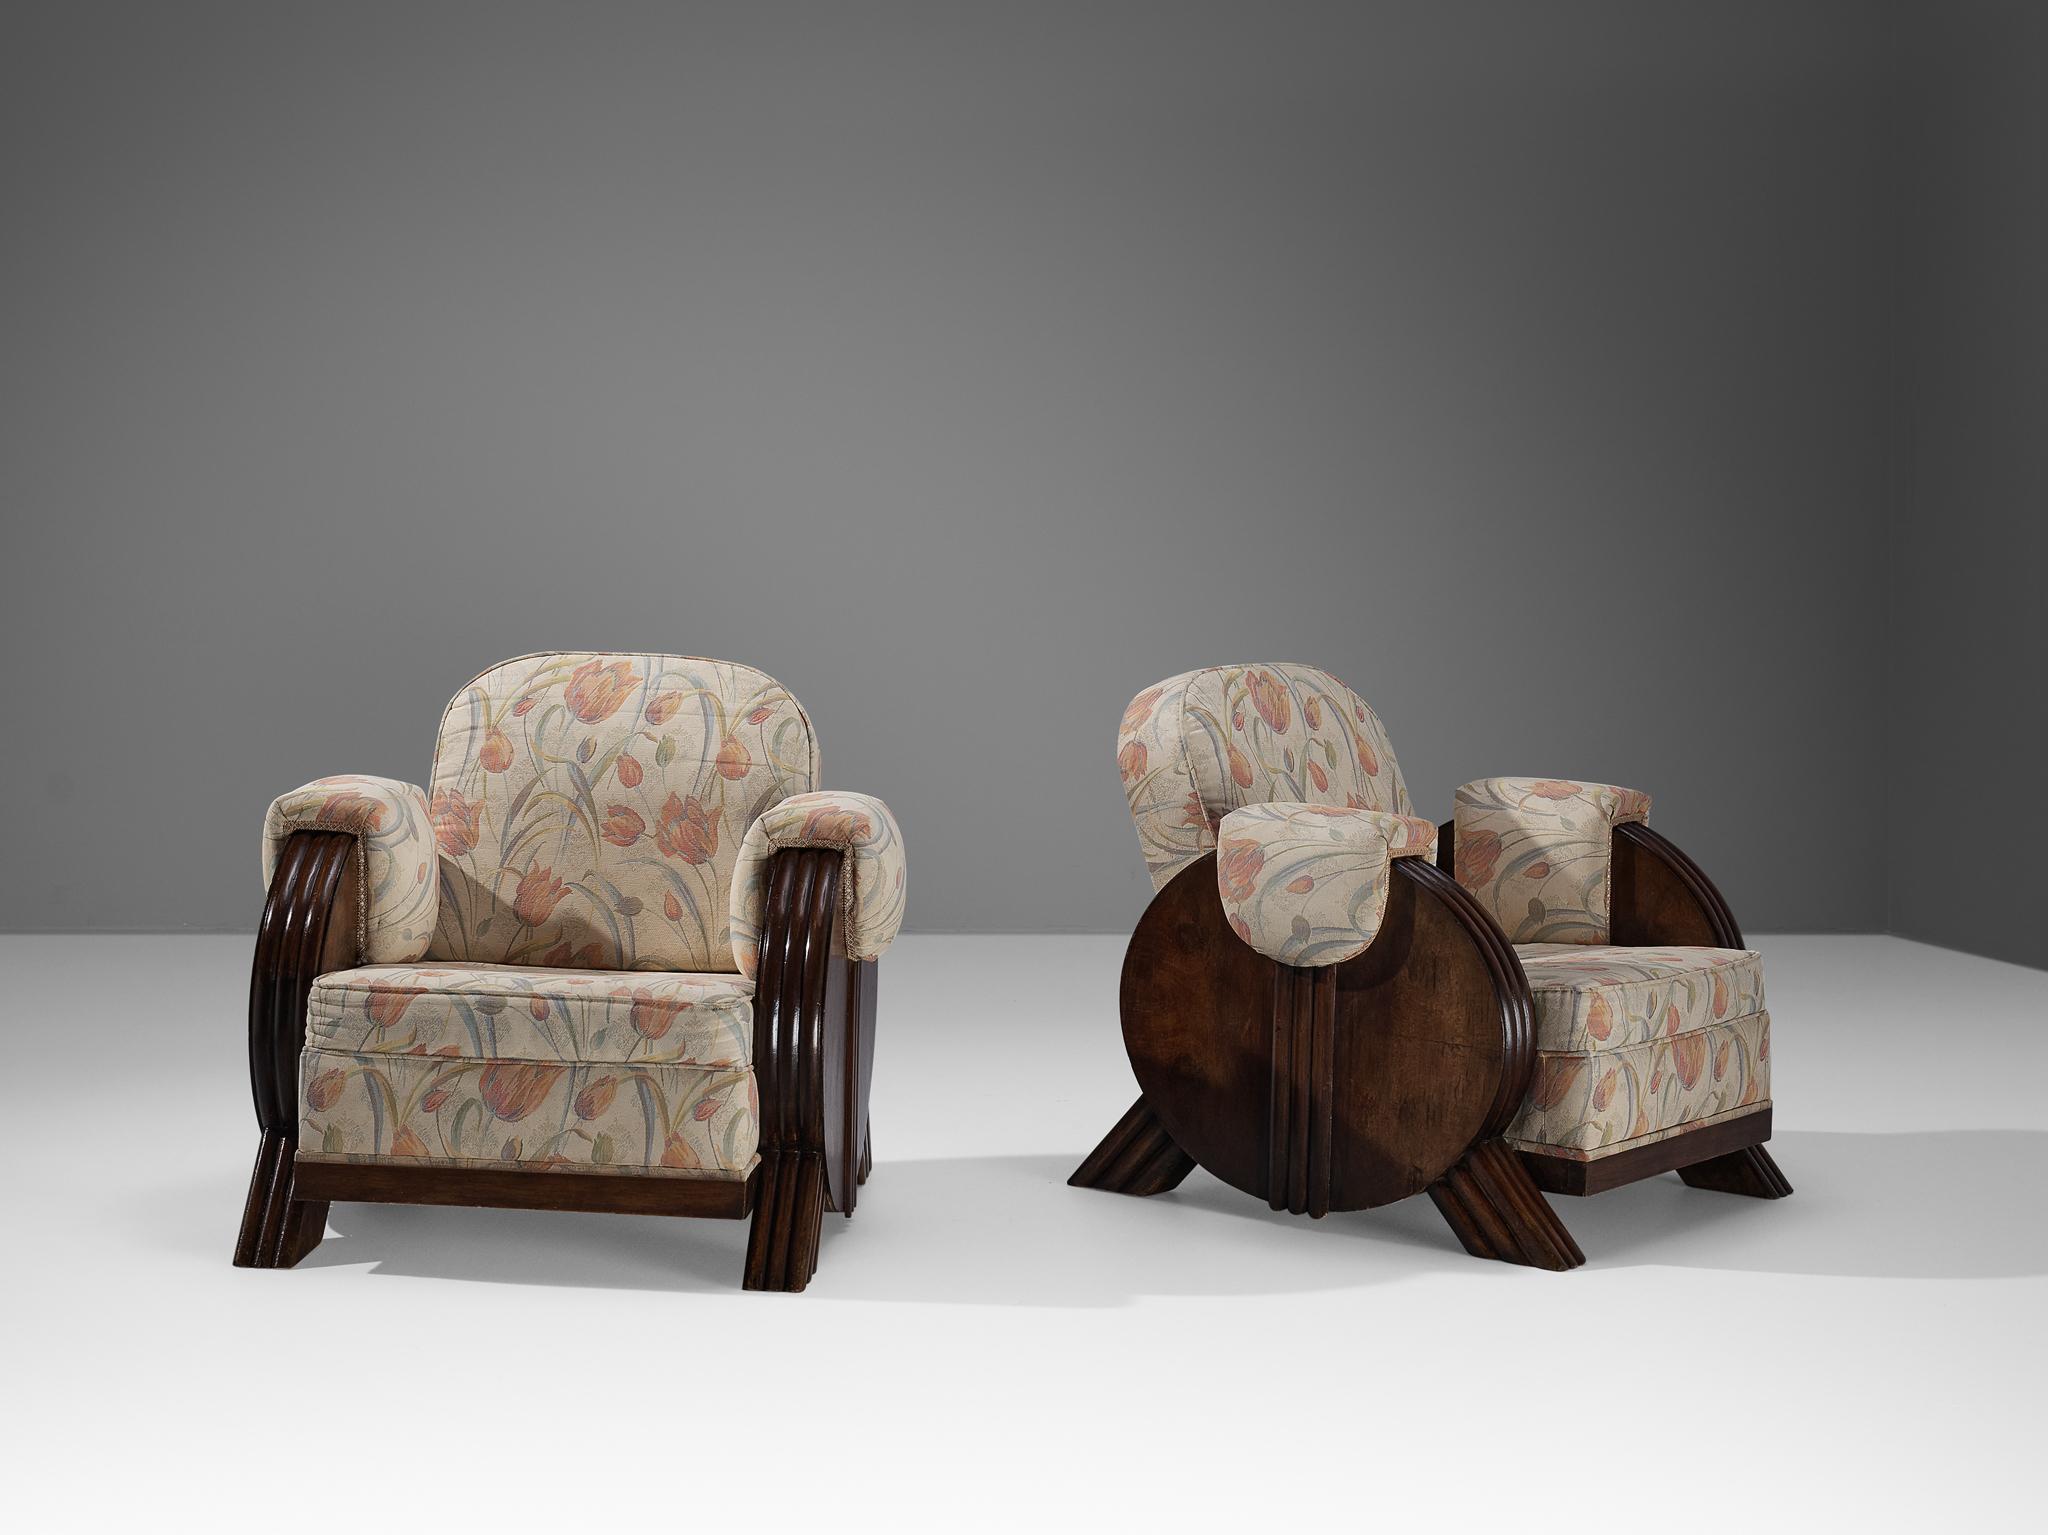 Italian Art Deco Pair of Lounge Chairs in Floral Upholstery and Wood For Sale 1